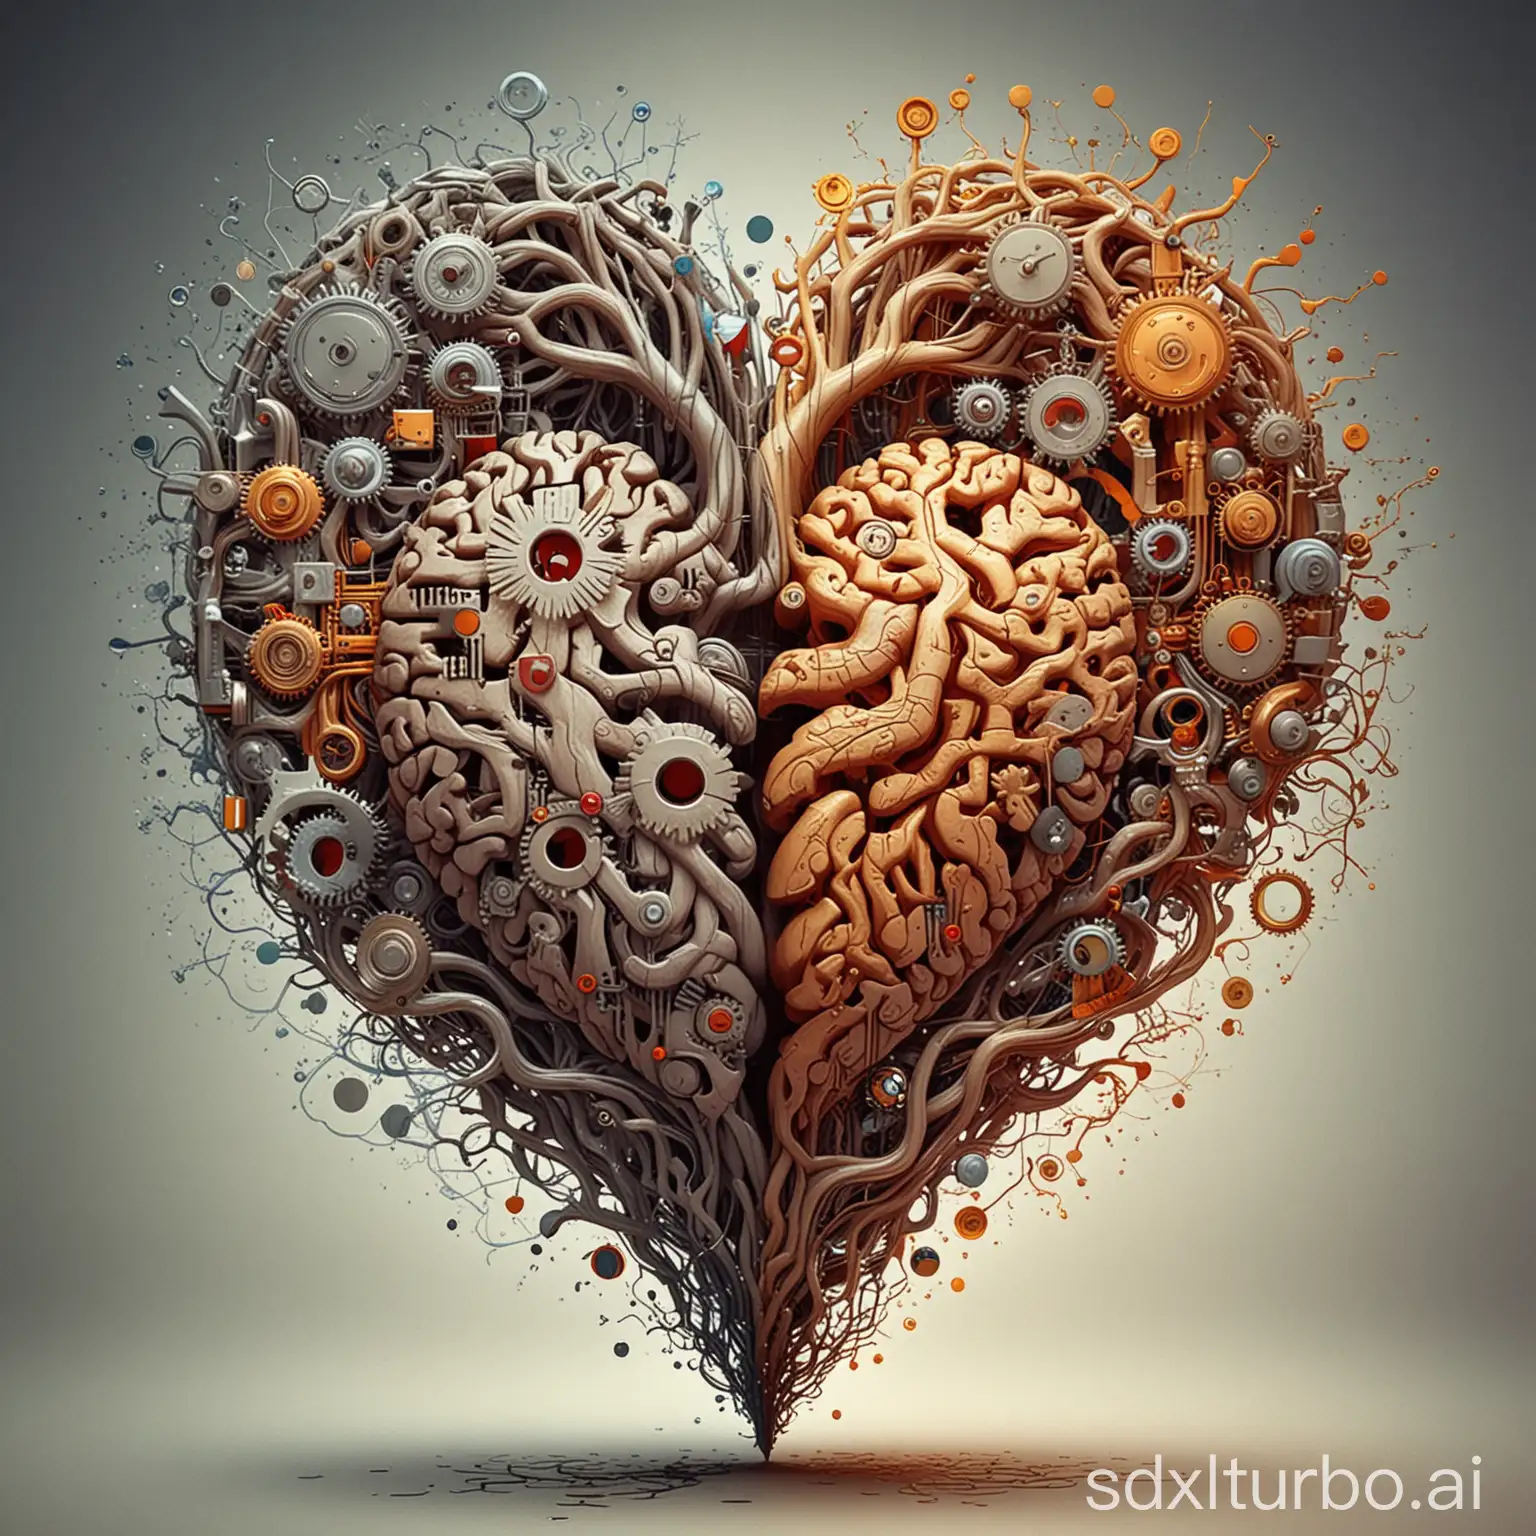 "Create a visual representation contrasting the concepts of 'Mind and Brain' with 'Heart and Soul'. On one side, depict the 'Mind and Brain' with imagery symbolizing logic, thought processes, and intellectual pursuits. This could include elements like gears, neurons firing, or a person deep in thought. On the other side, represent 'Heart and Soul' with symbols of emotions, empathy, and spirituality. Use warm colors, flowing lines, and perhaps incorporate nature elements like trees or flowing water to evoke a sense of deep feeling and connection."